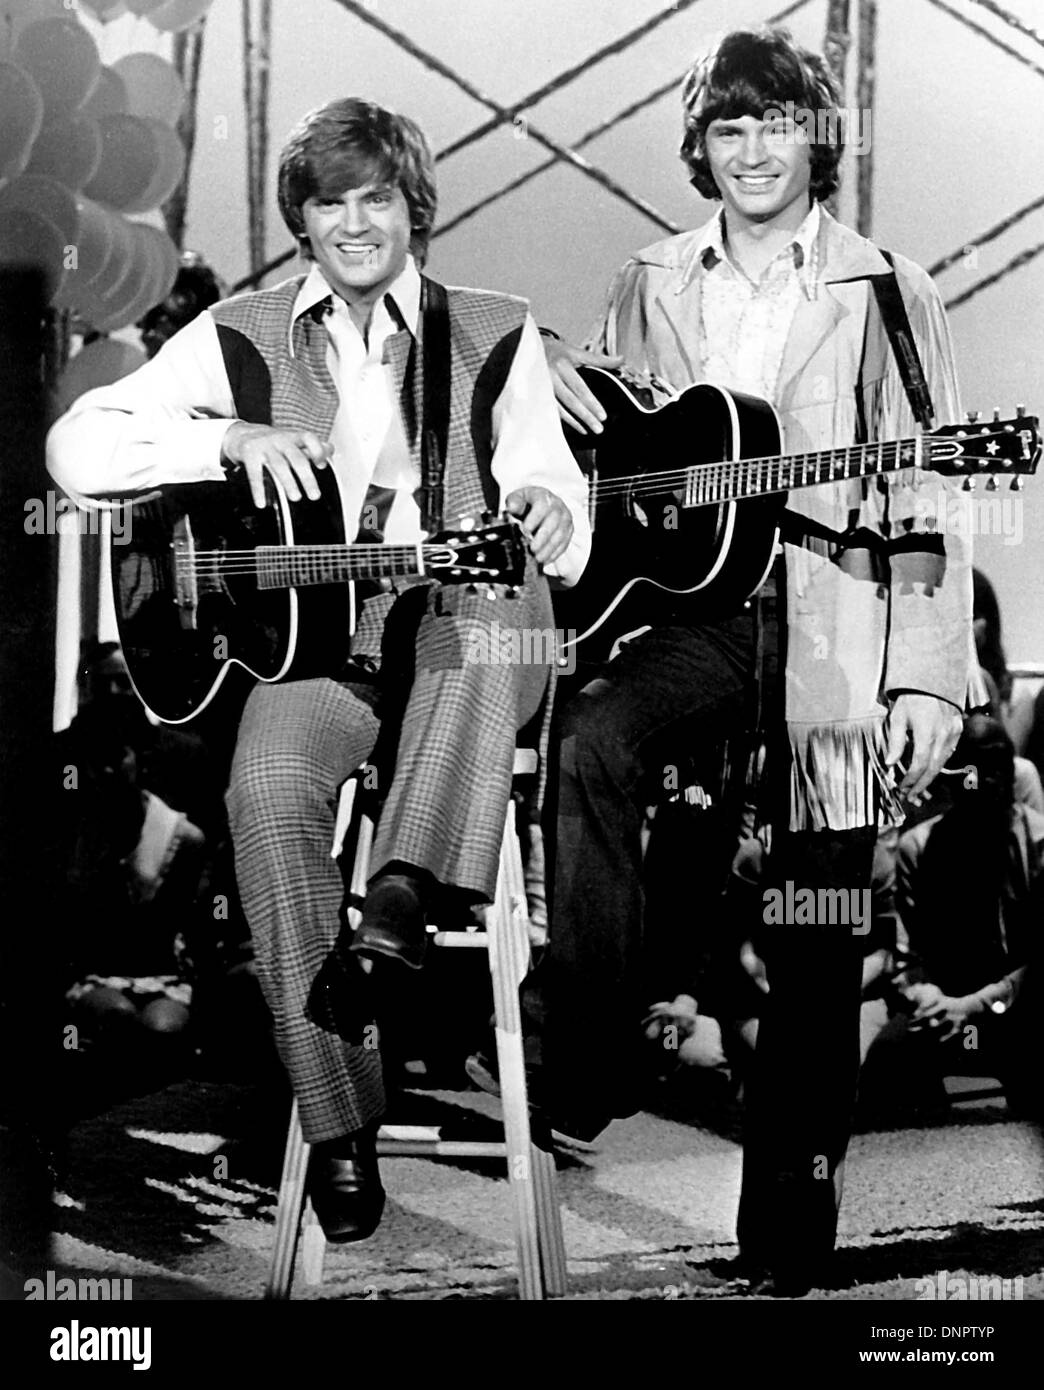 Burbank, California, USA. 3rd Jan, 2014. Phil Everly, who with his brother Don, made up the musical duo The Everly Brothers, died Friday from chronic obstructive pulmonary disease. He was 74 years old. PICTURED: 1970 - PHIL and DON EVERLY, the Everly Brothers. Credit:  Globe Photos/ZUMAPRESS.com/Alamy Live News Stock Photo